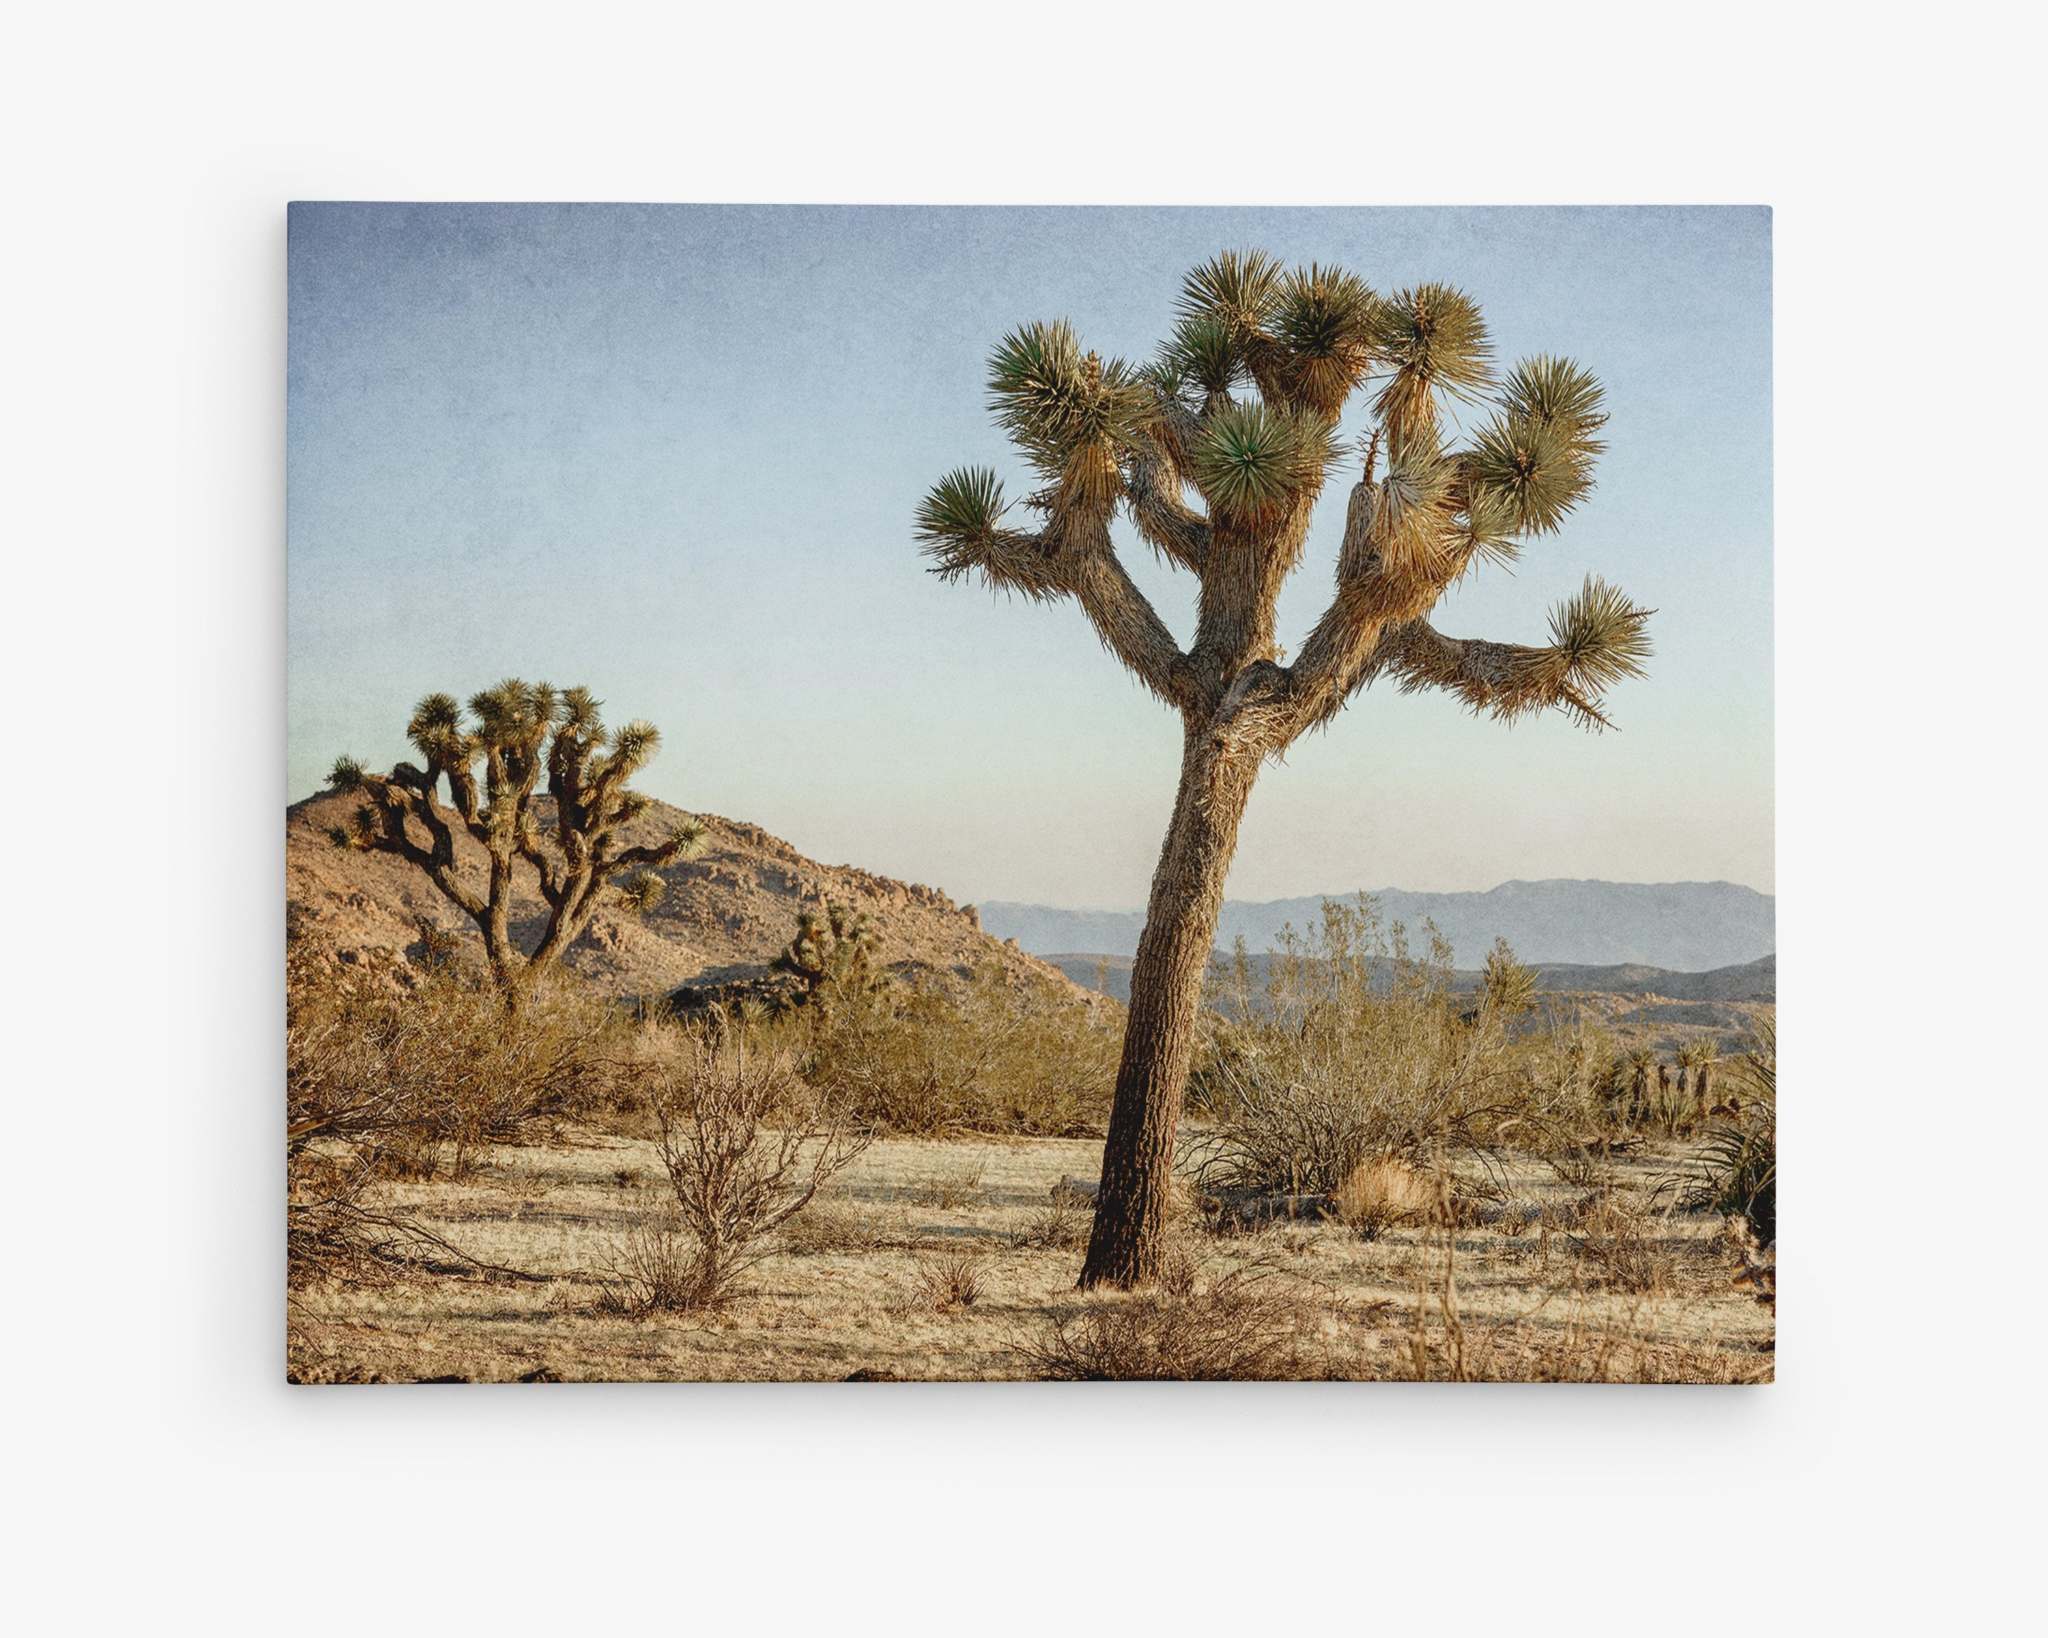 A scenic view of Joshua Tree National Park shows a prominent Joshua tree in the foreground with more Joshua trees and desert vegetation spread across a hilly landscape. The sky is clear and blue, and mountains are visible in the distance under soft sunlight, creating a perfect Offley Green Joshua Tree Canvas Wall Art, &#39;Mighty Joshua&#39; for any Palm Springs art lover.